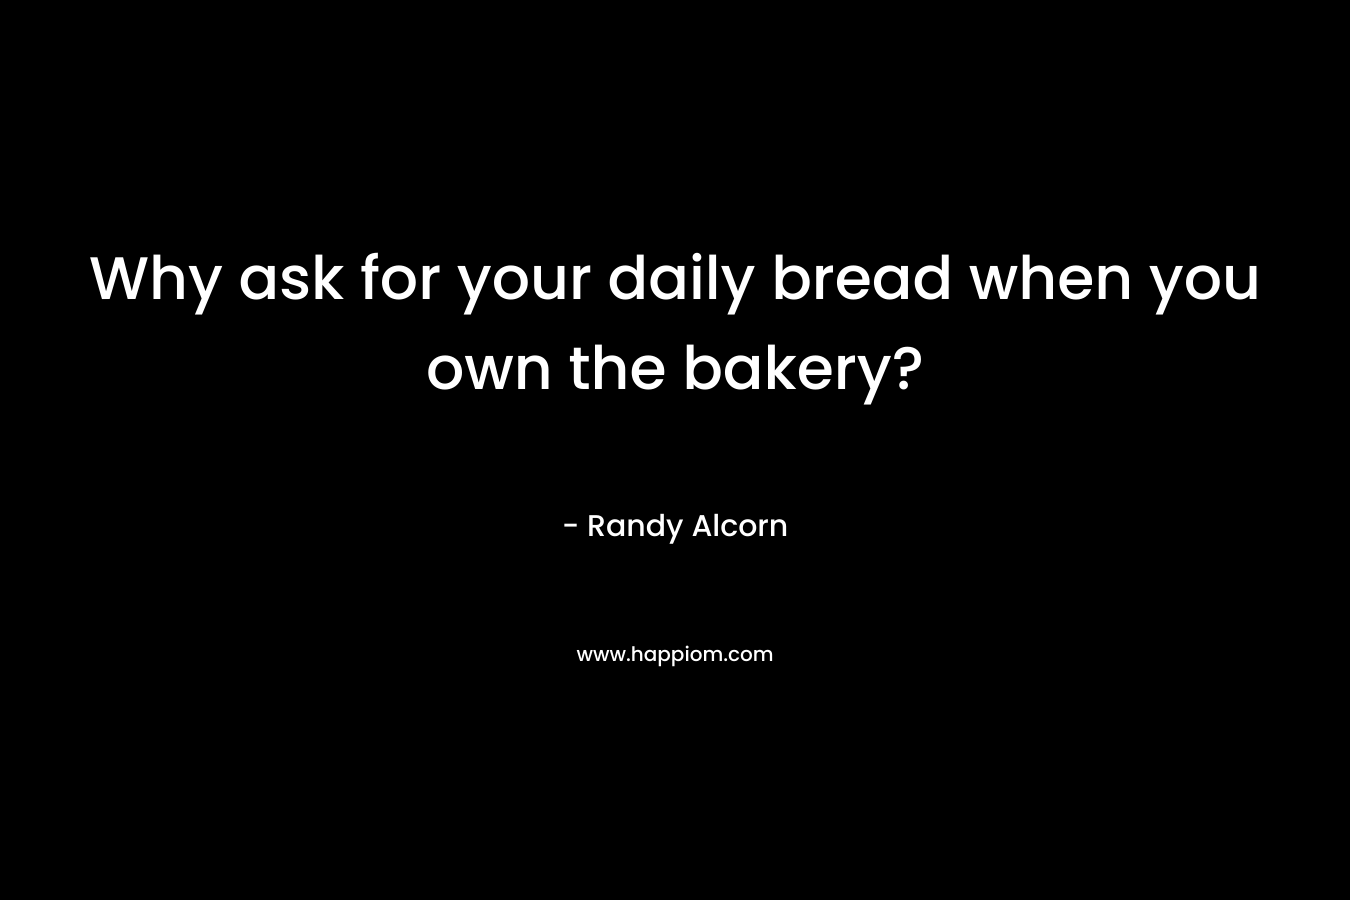 Why ask for your daily bread when you own the bakery?